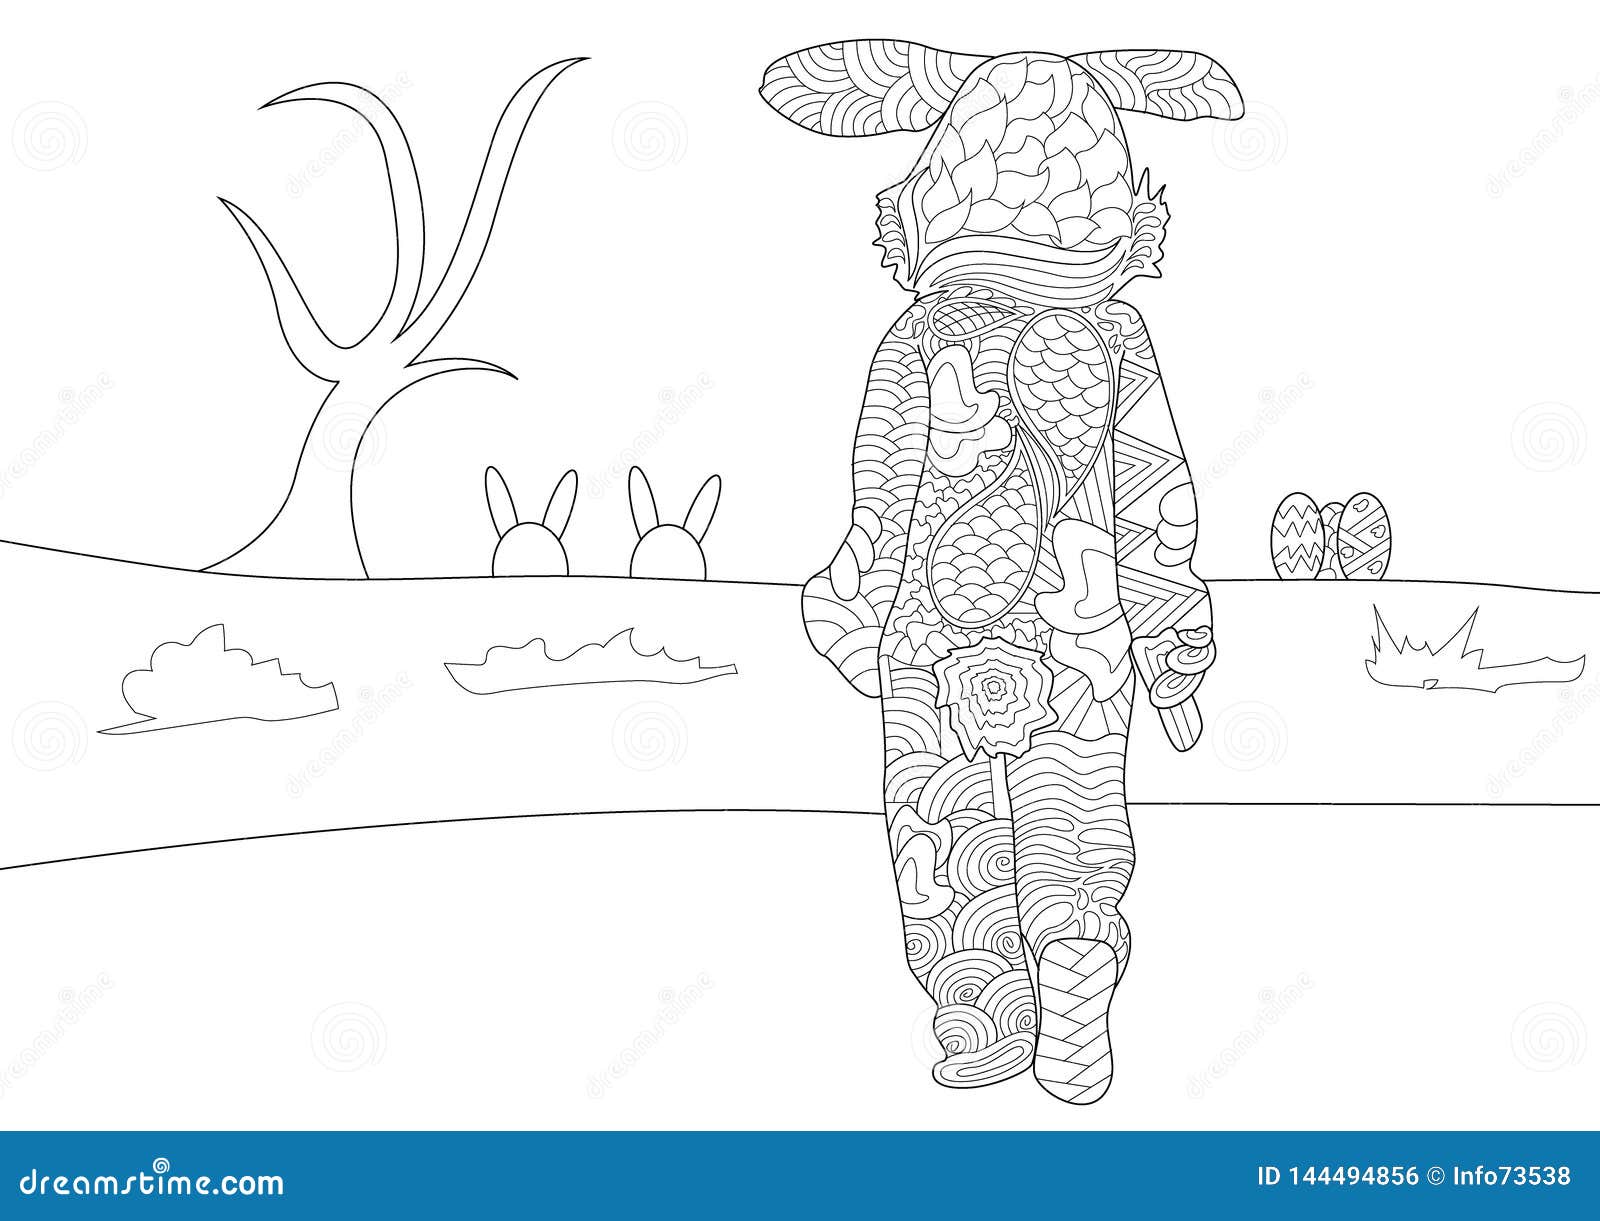 Download Easter Bunny Walking In Field Scene Pattern Coloring Page ...